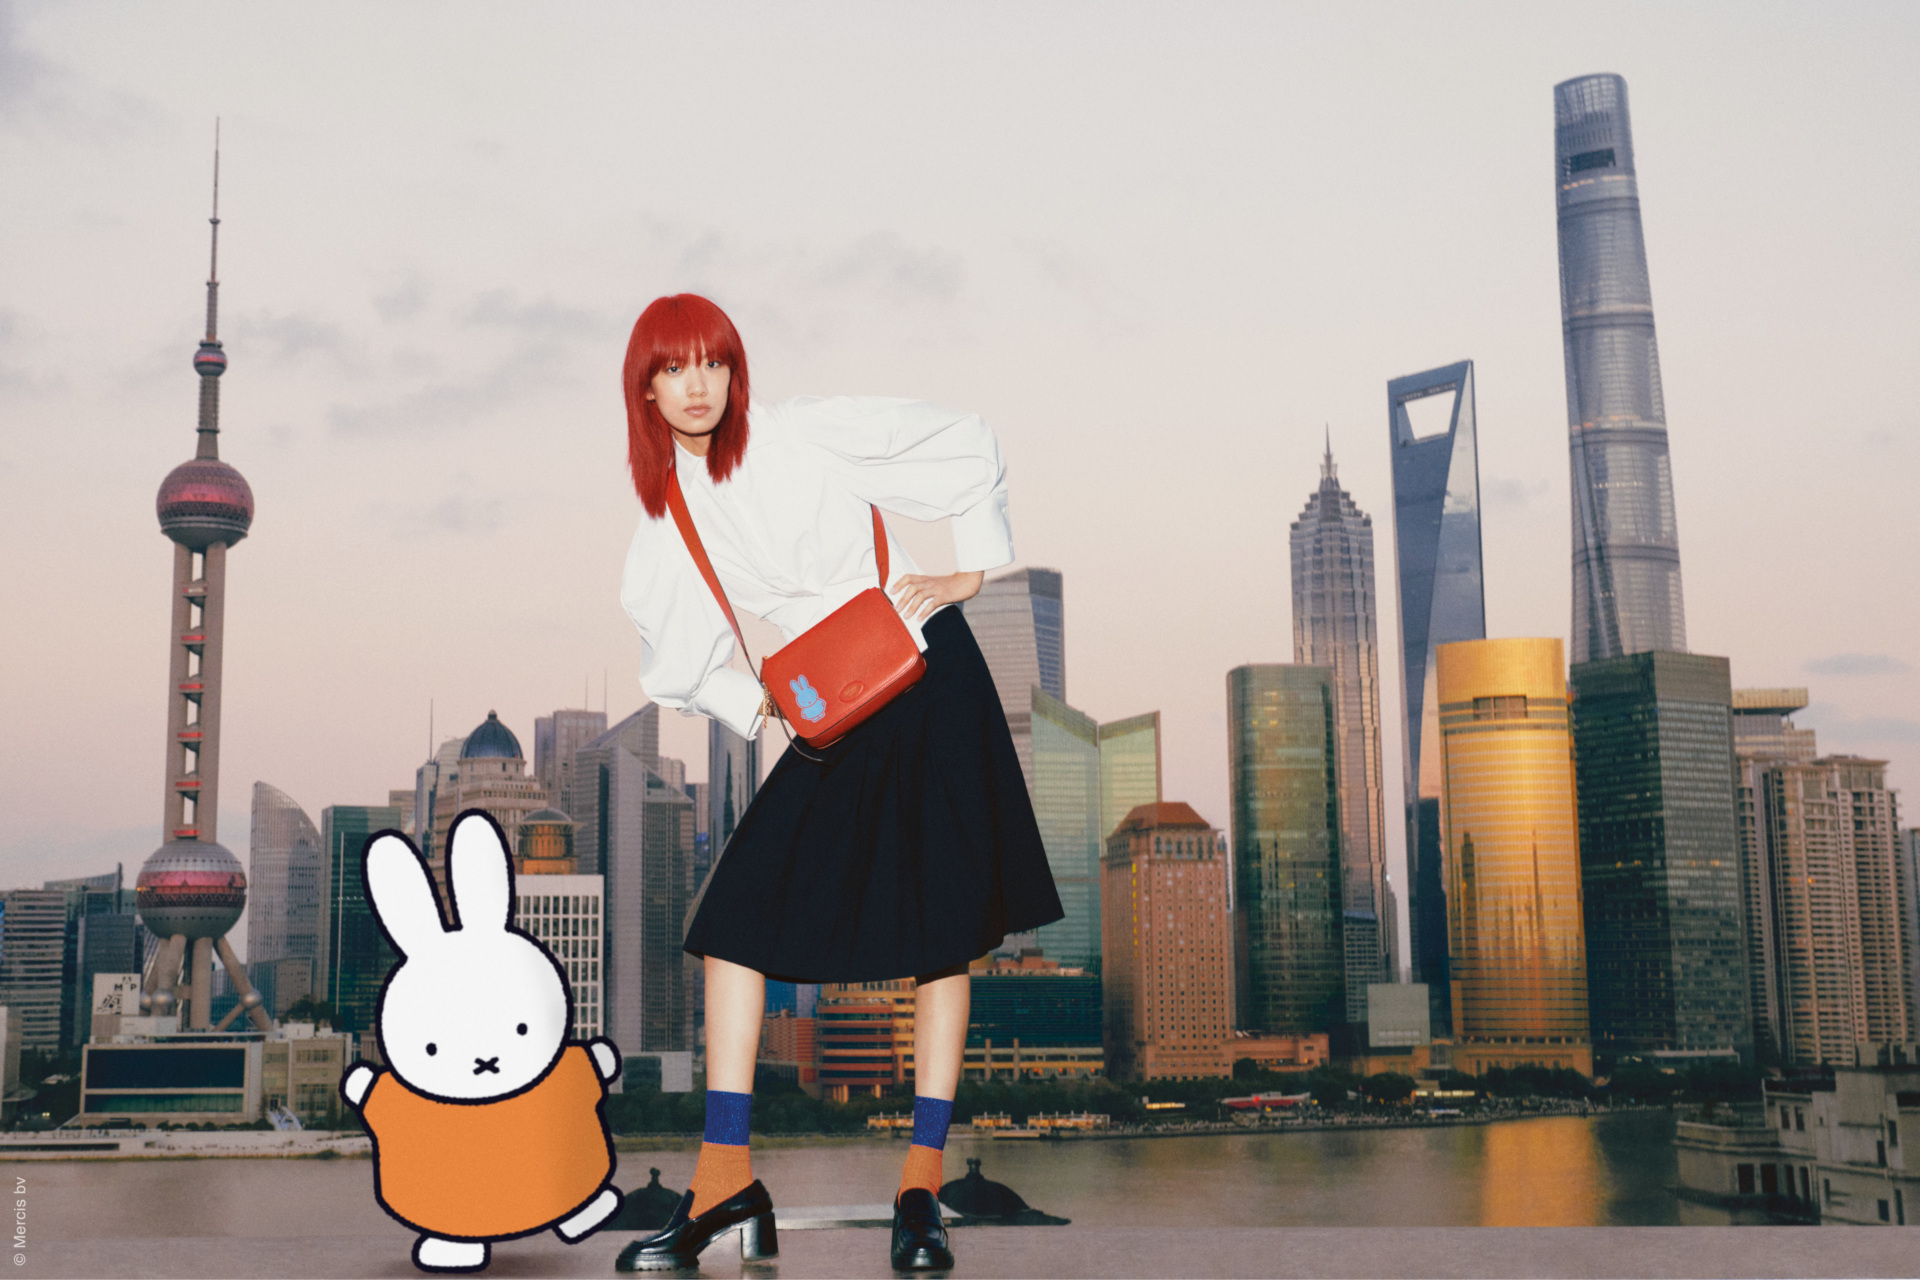 Woman with red hair stood in front of city skyline with Miffy character